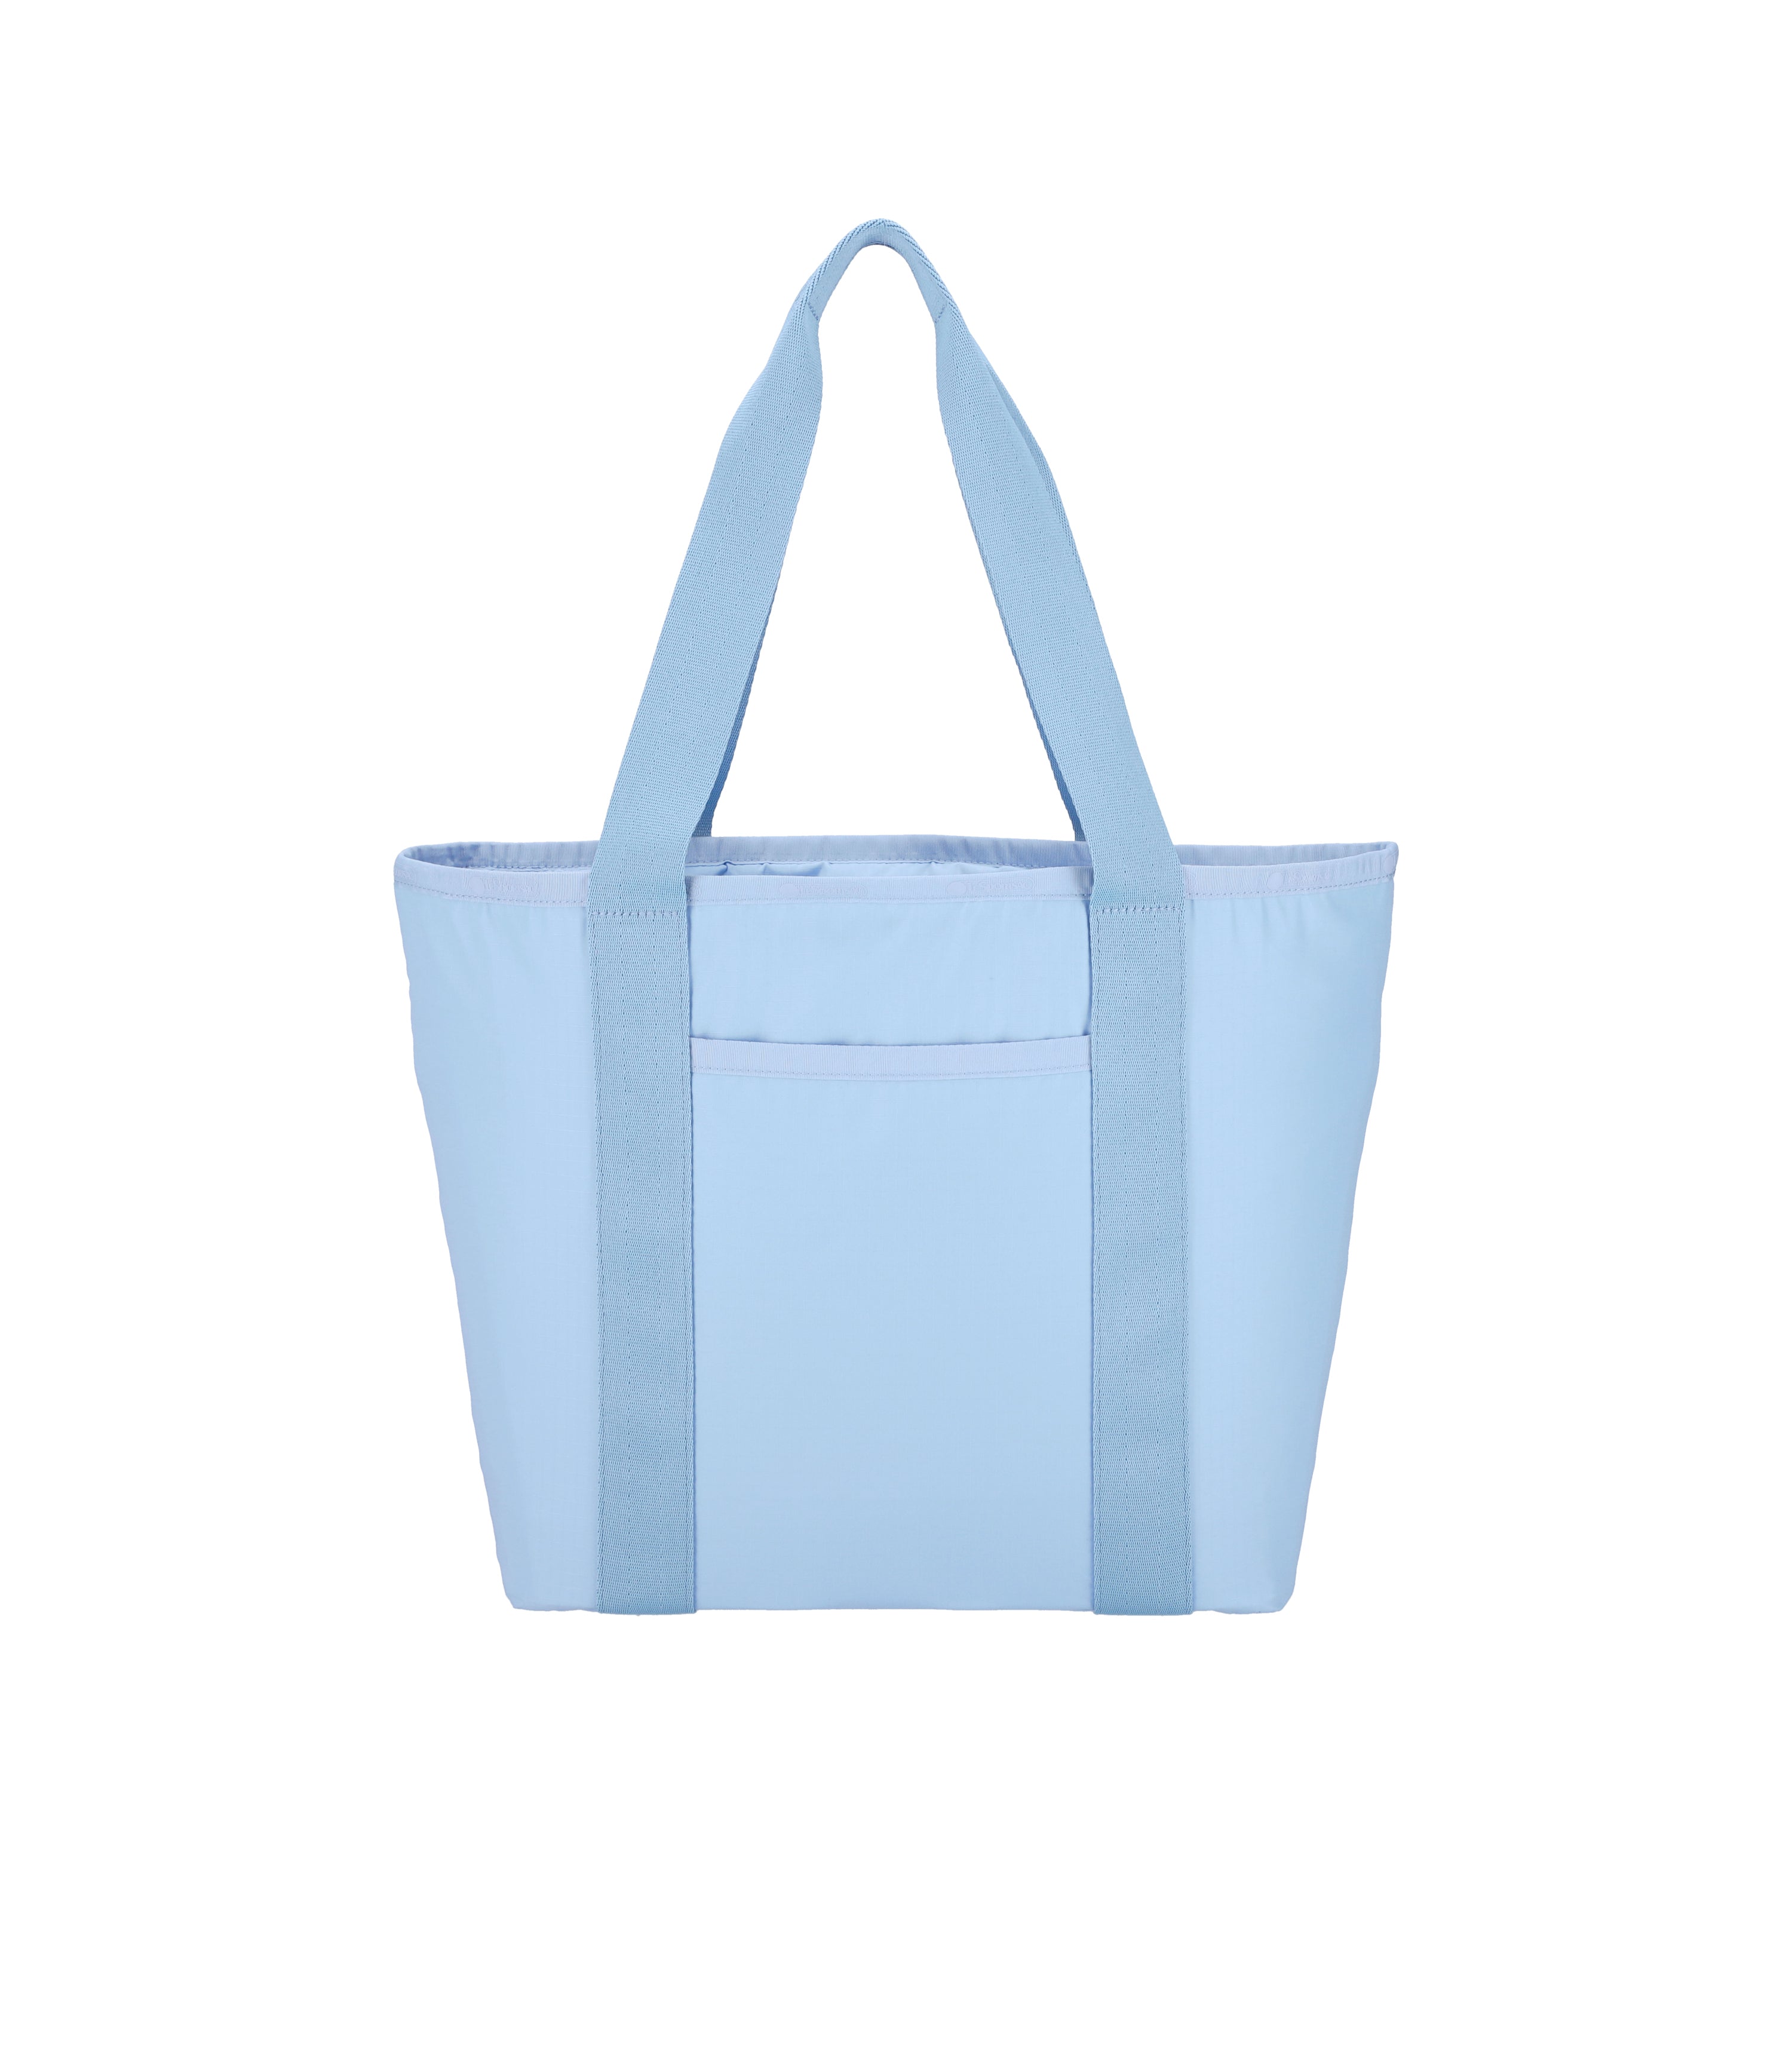 Everyday Zip Tote - Blue Iris solid – LeSportsac